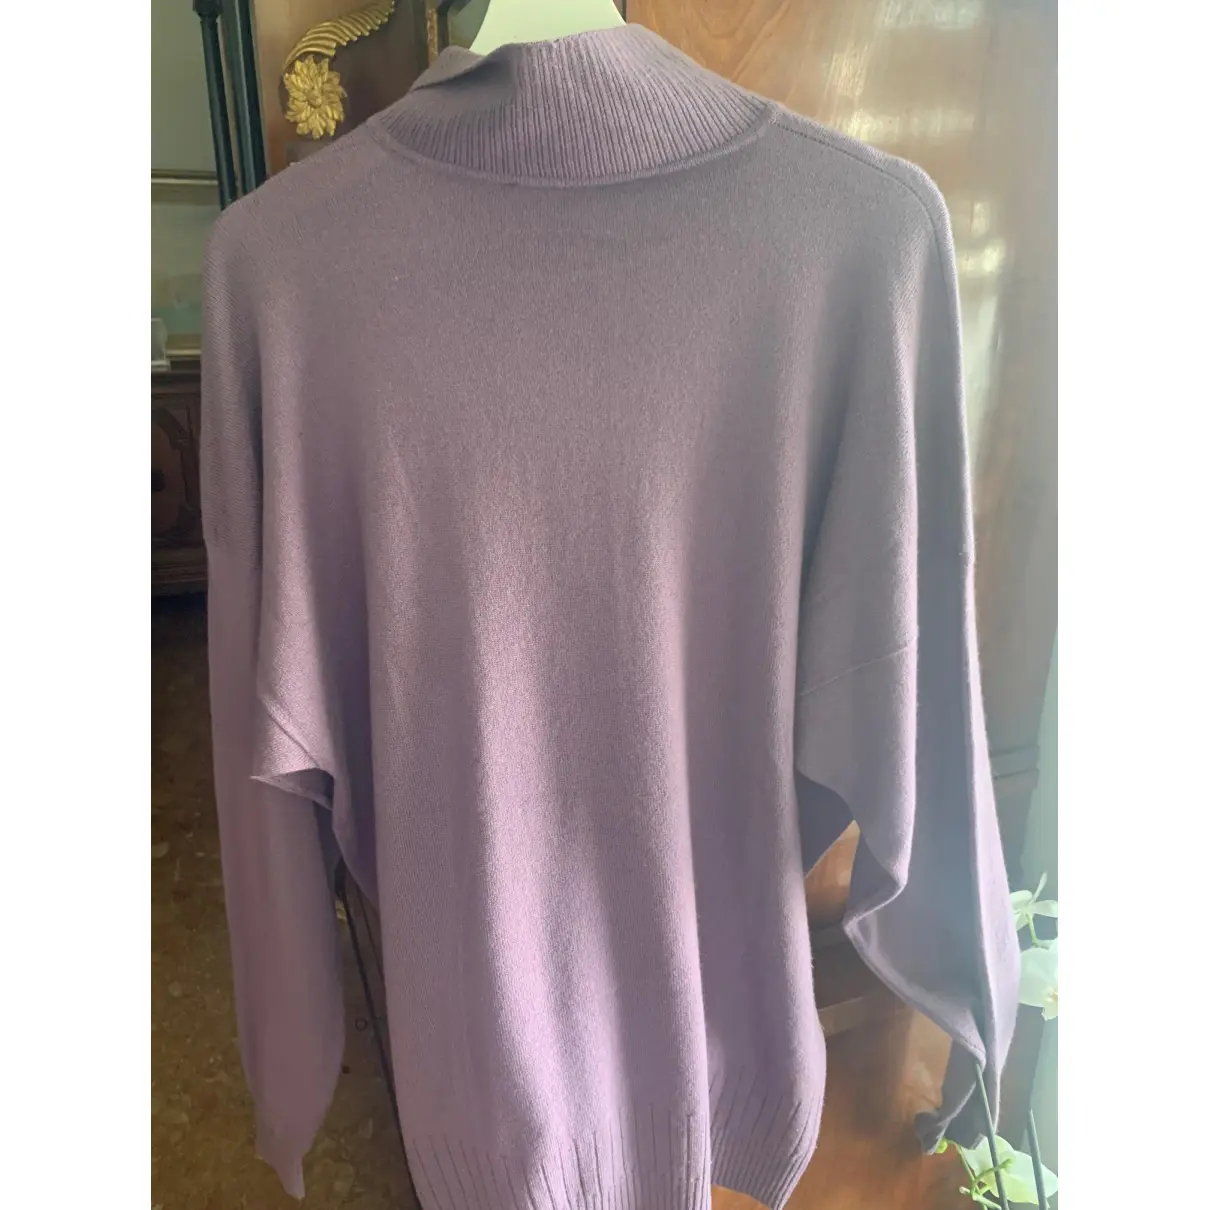 Buy Gianni Versace Cashmere pull online - Vintage